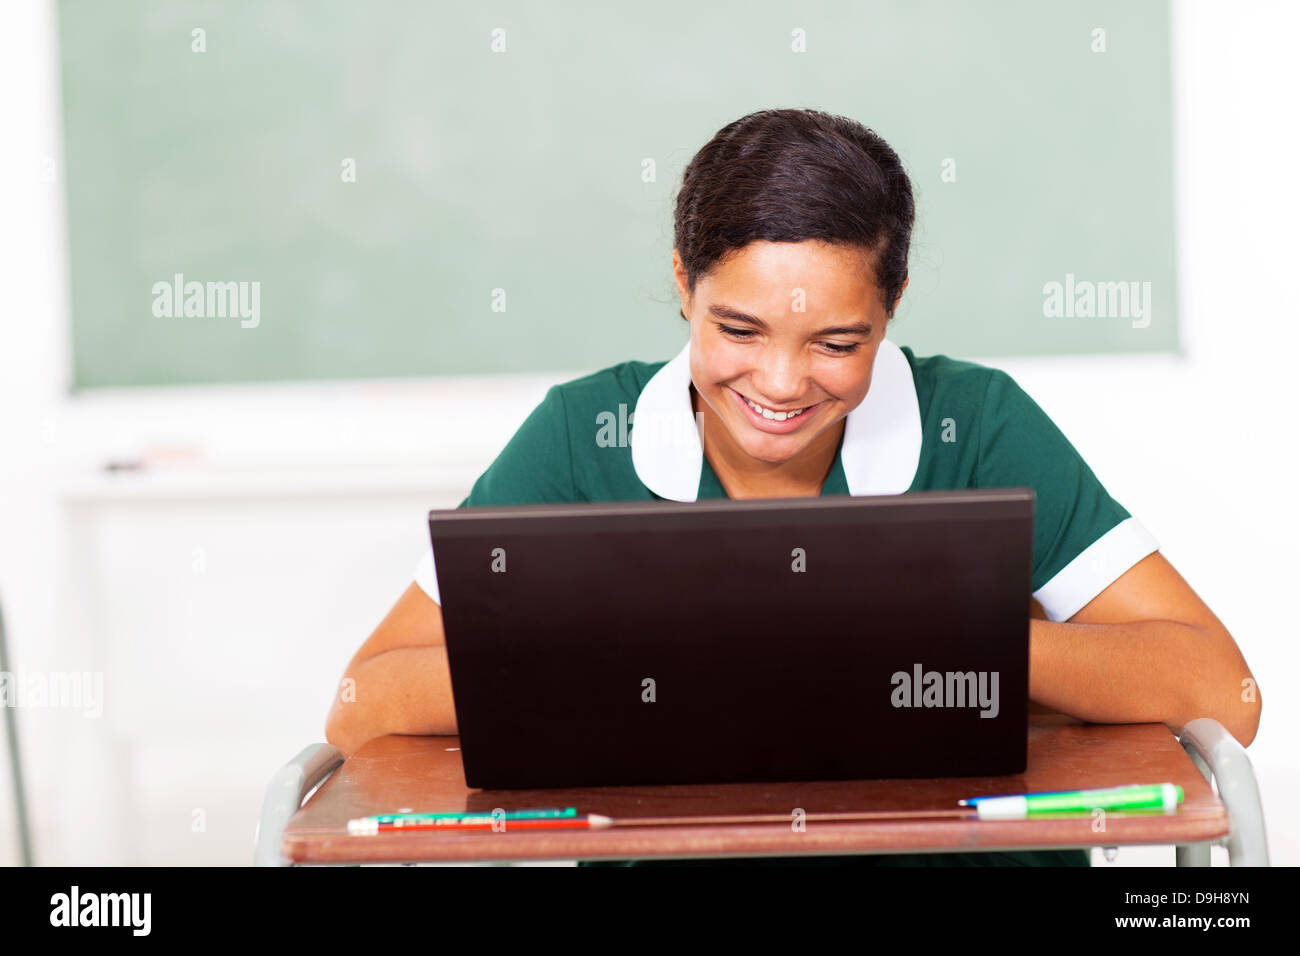 female high school student using laptop in classroom Stock Photo